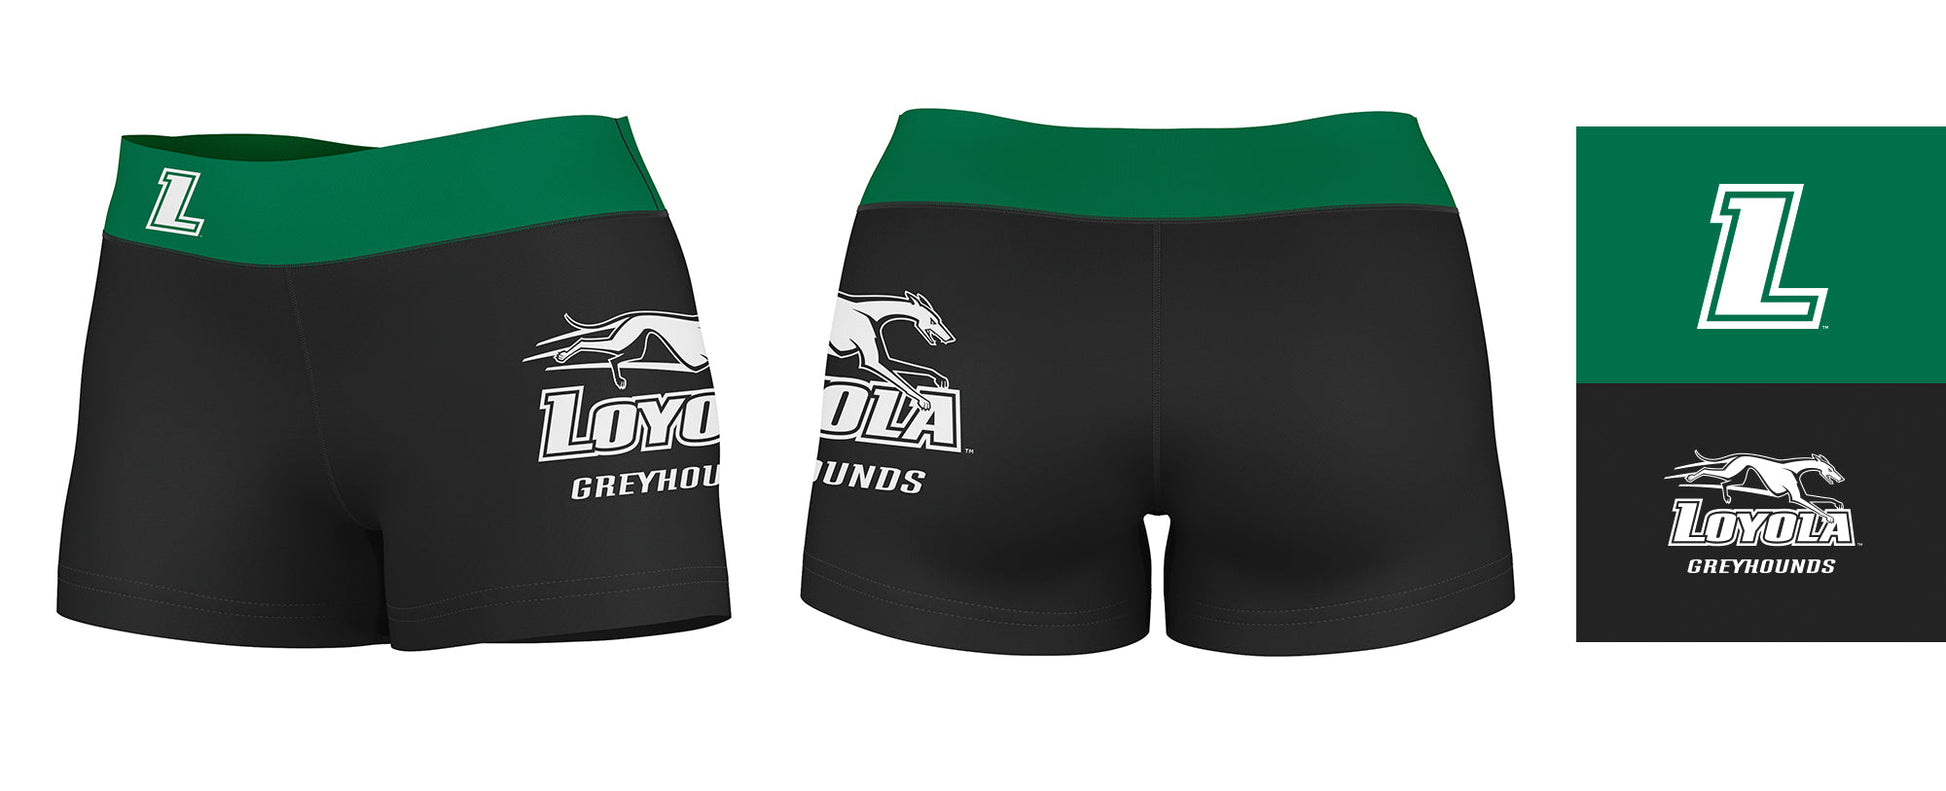 Loyola Maryland Greyhounds Logo on Thigh & Waistband Black & Green Women Yoga Booty Workout Shorts 3.75 Inseam - Vive La F̻te - Online Apparel Store